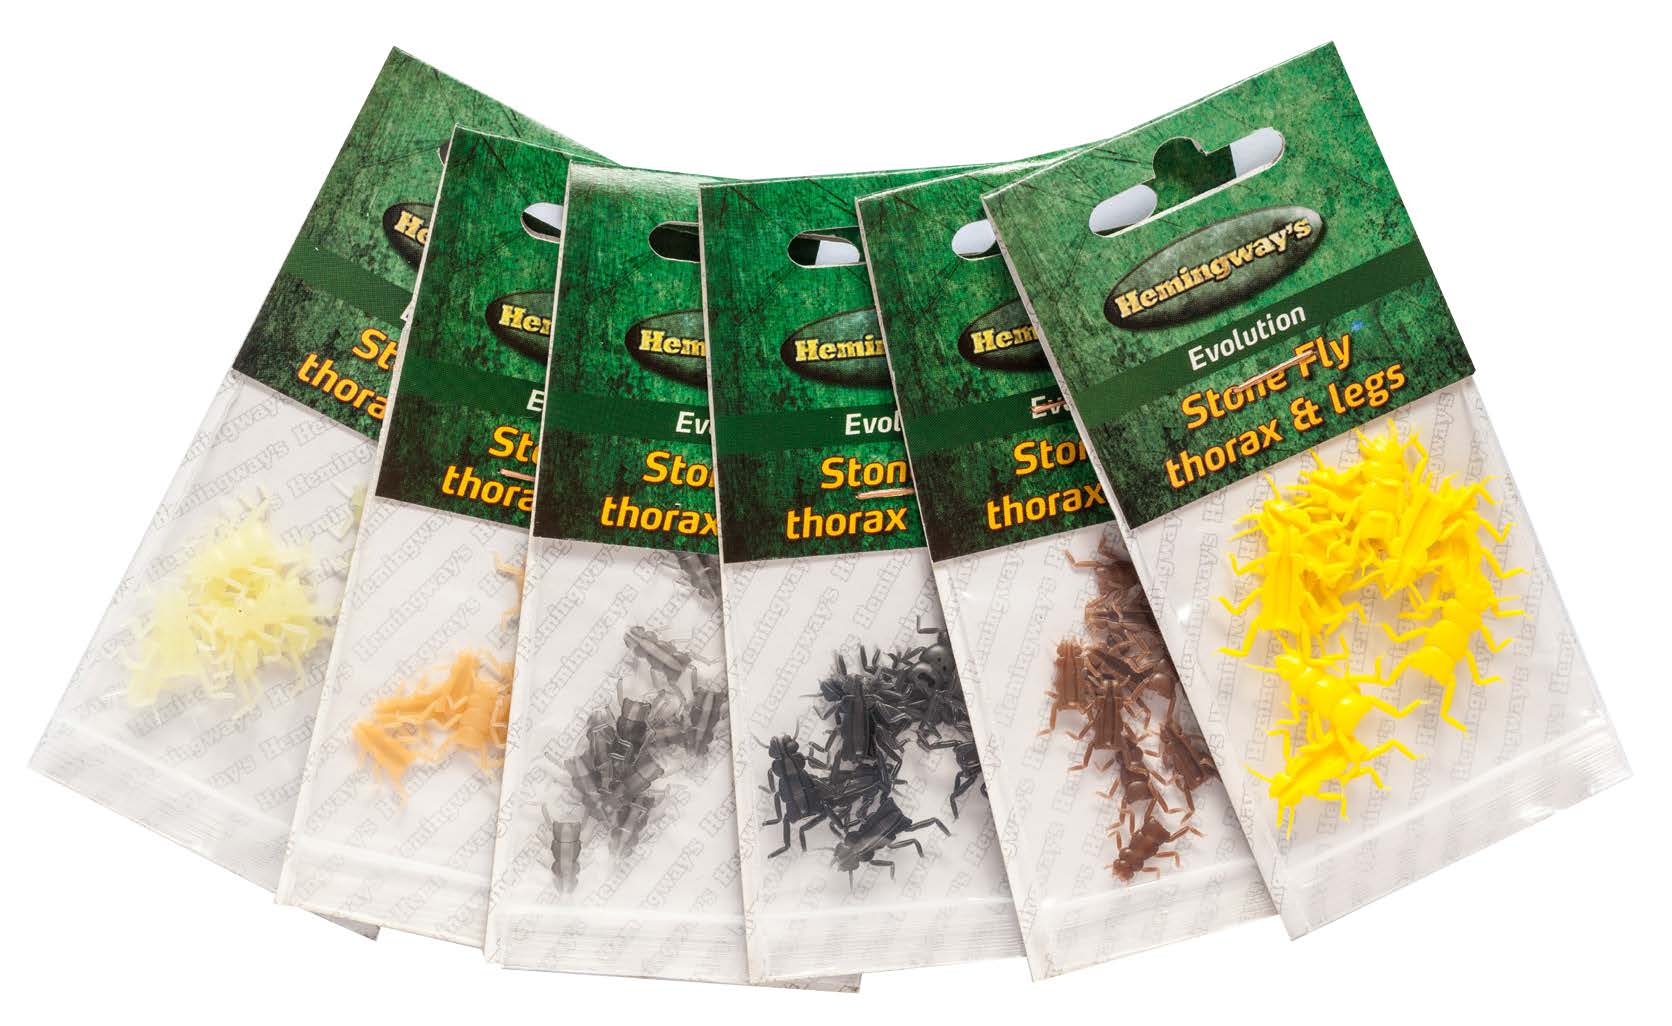 Hemingway's Evolution Stone Fly Thorax & Legs Large Golden Yellow Fly Tying Materials